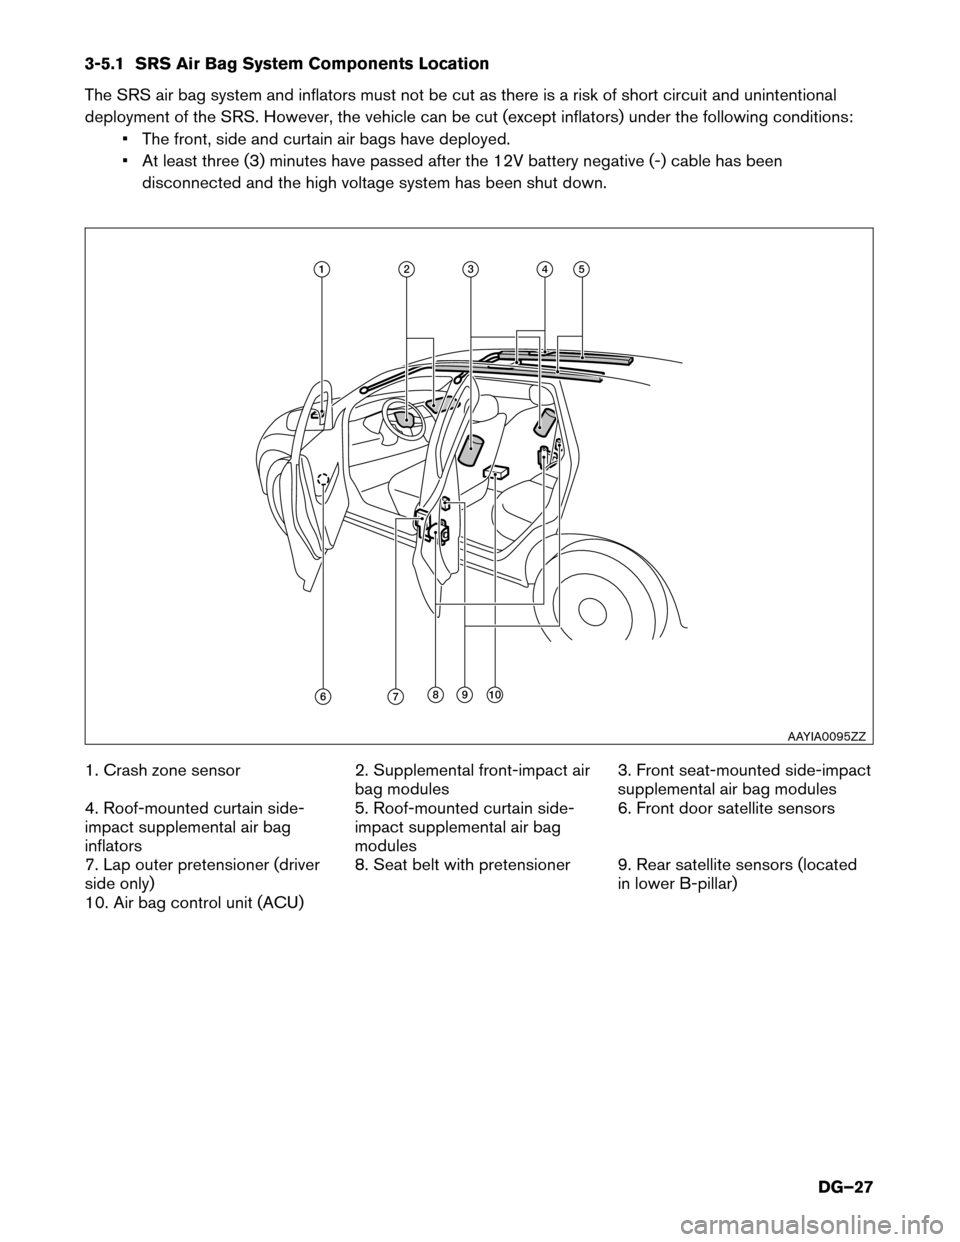 NISSAN LEAF 2015 1.G Dismantling Guide 3-5.1 SRS Air Bag System Components Location
The
SRS air bag system and inflators must not be cut as there is a risk of short circuit and unintentional
deployment of the SRS. However, the vehicle can 